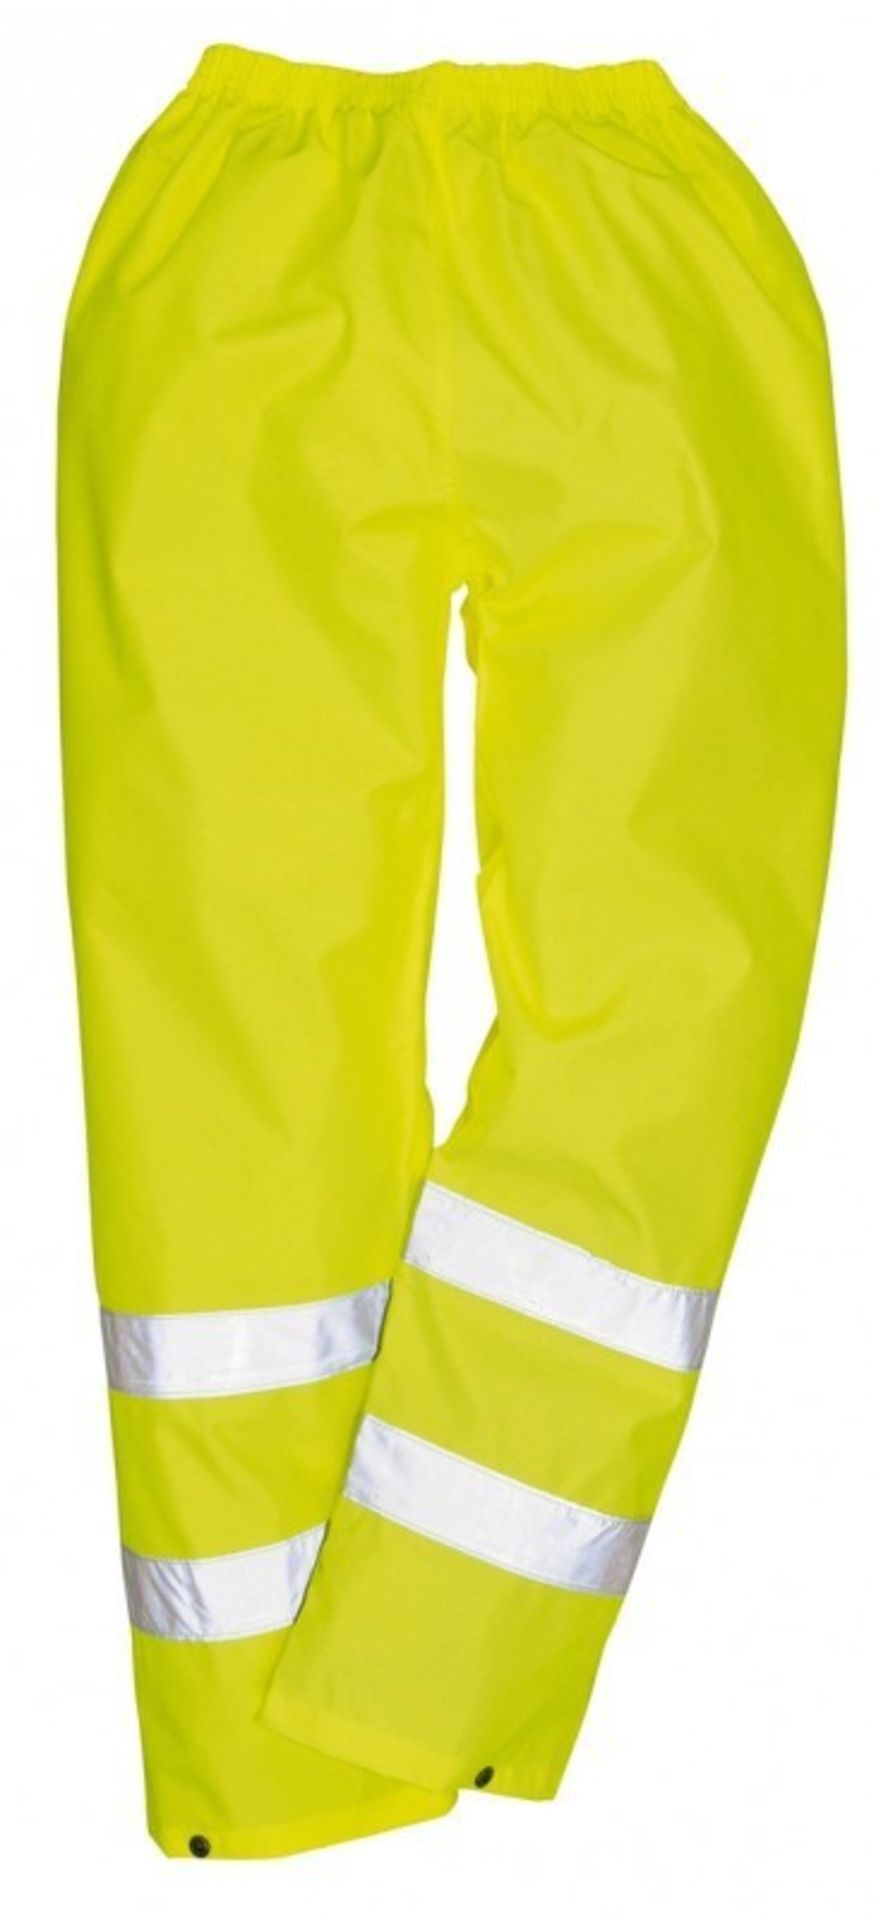 1 x Portwest S480 Hi-Vis Traffic Trousers - Class 3/rail Spec Overtrousers For Tough Working